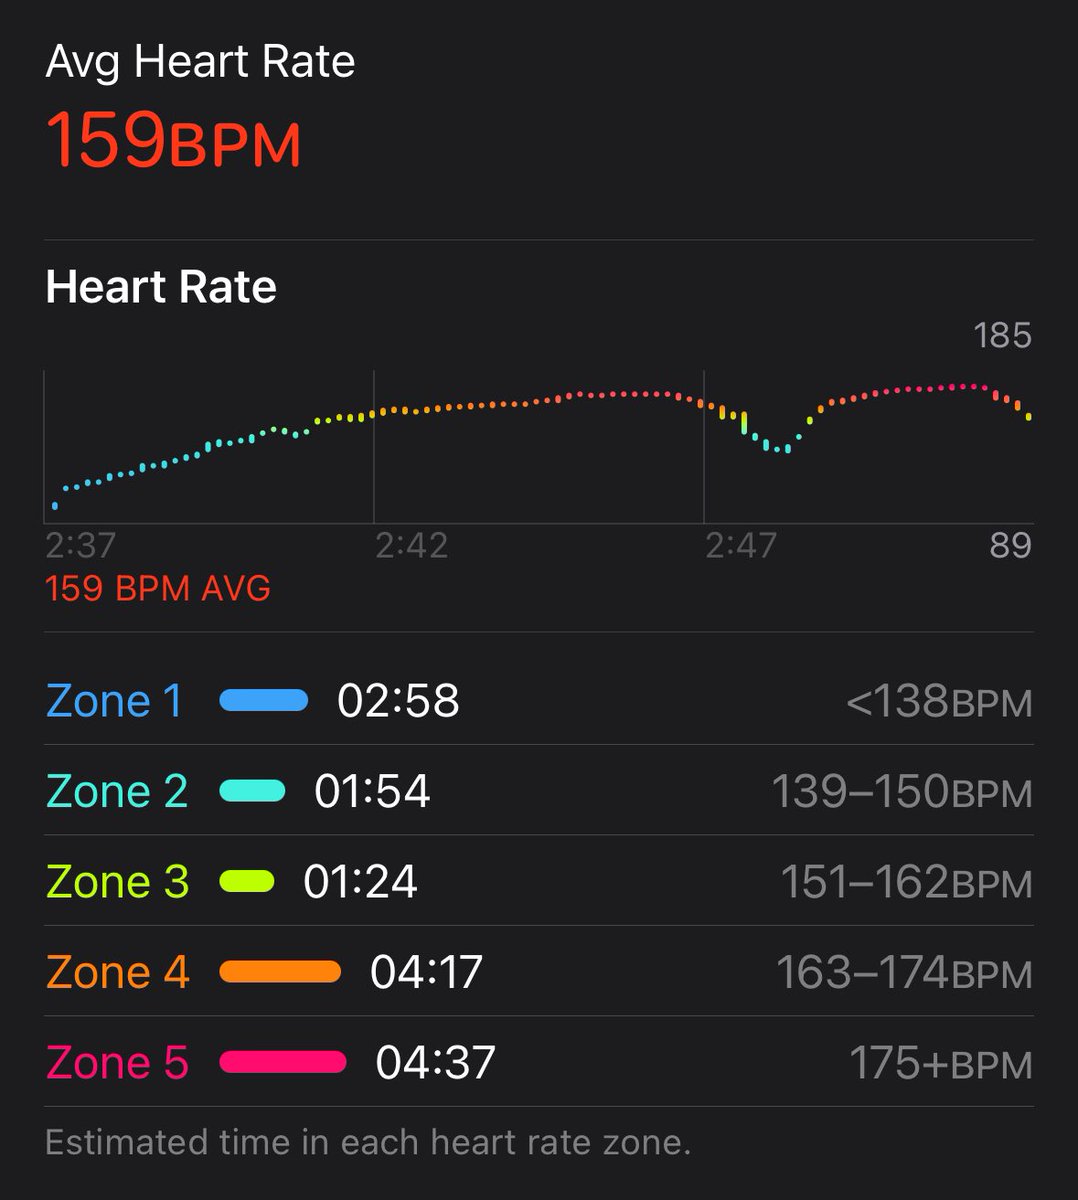 High altitude workouts are fun given the elevation of Nairobi is almost 6,000 feet above MSL. Multiple benefits such as improved O2 delivery, increased lung capacity, higher endurance and heart rate. Perfect start to my day 😉 #Layover #PilotLife #Fitness